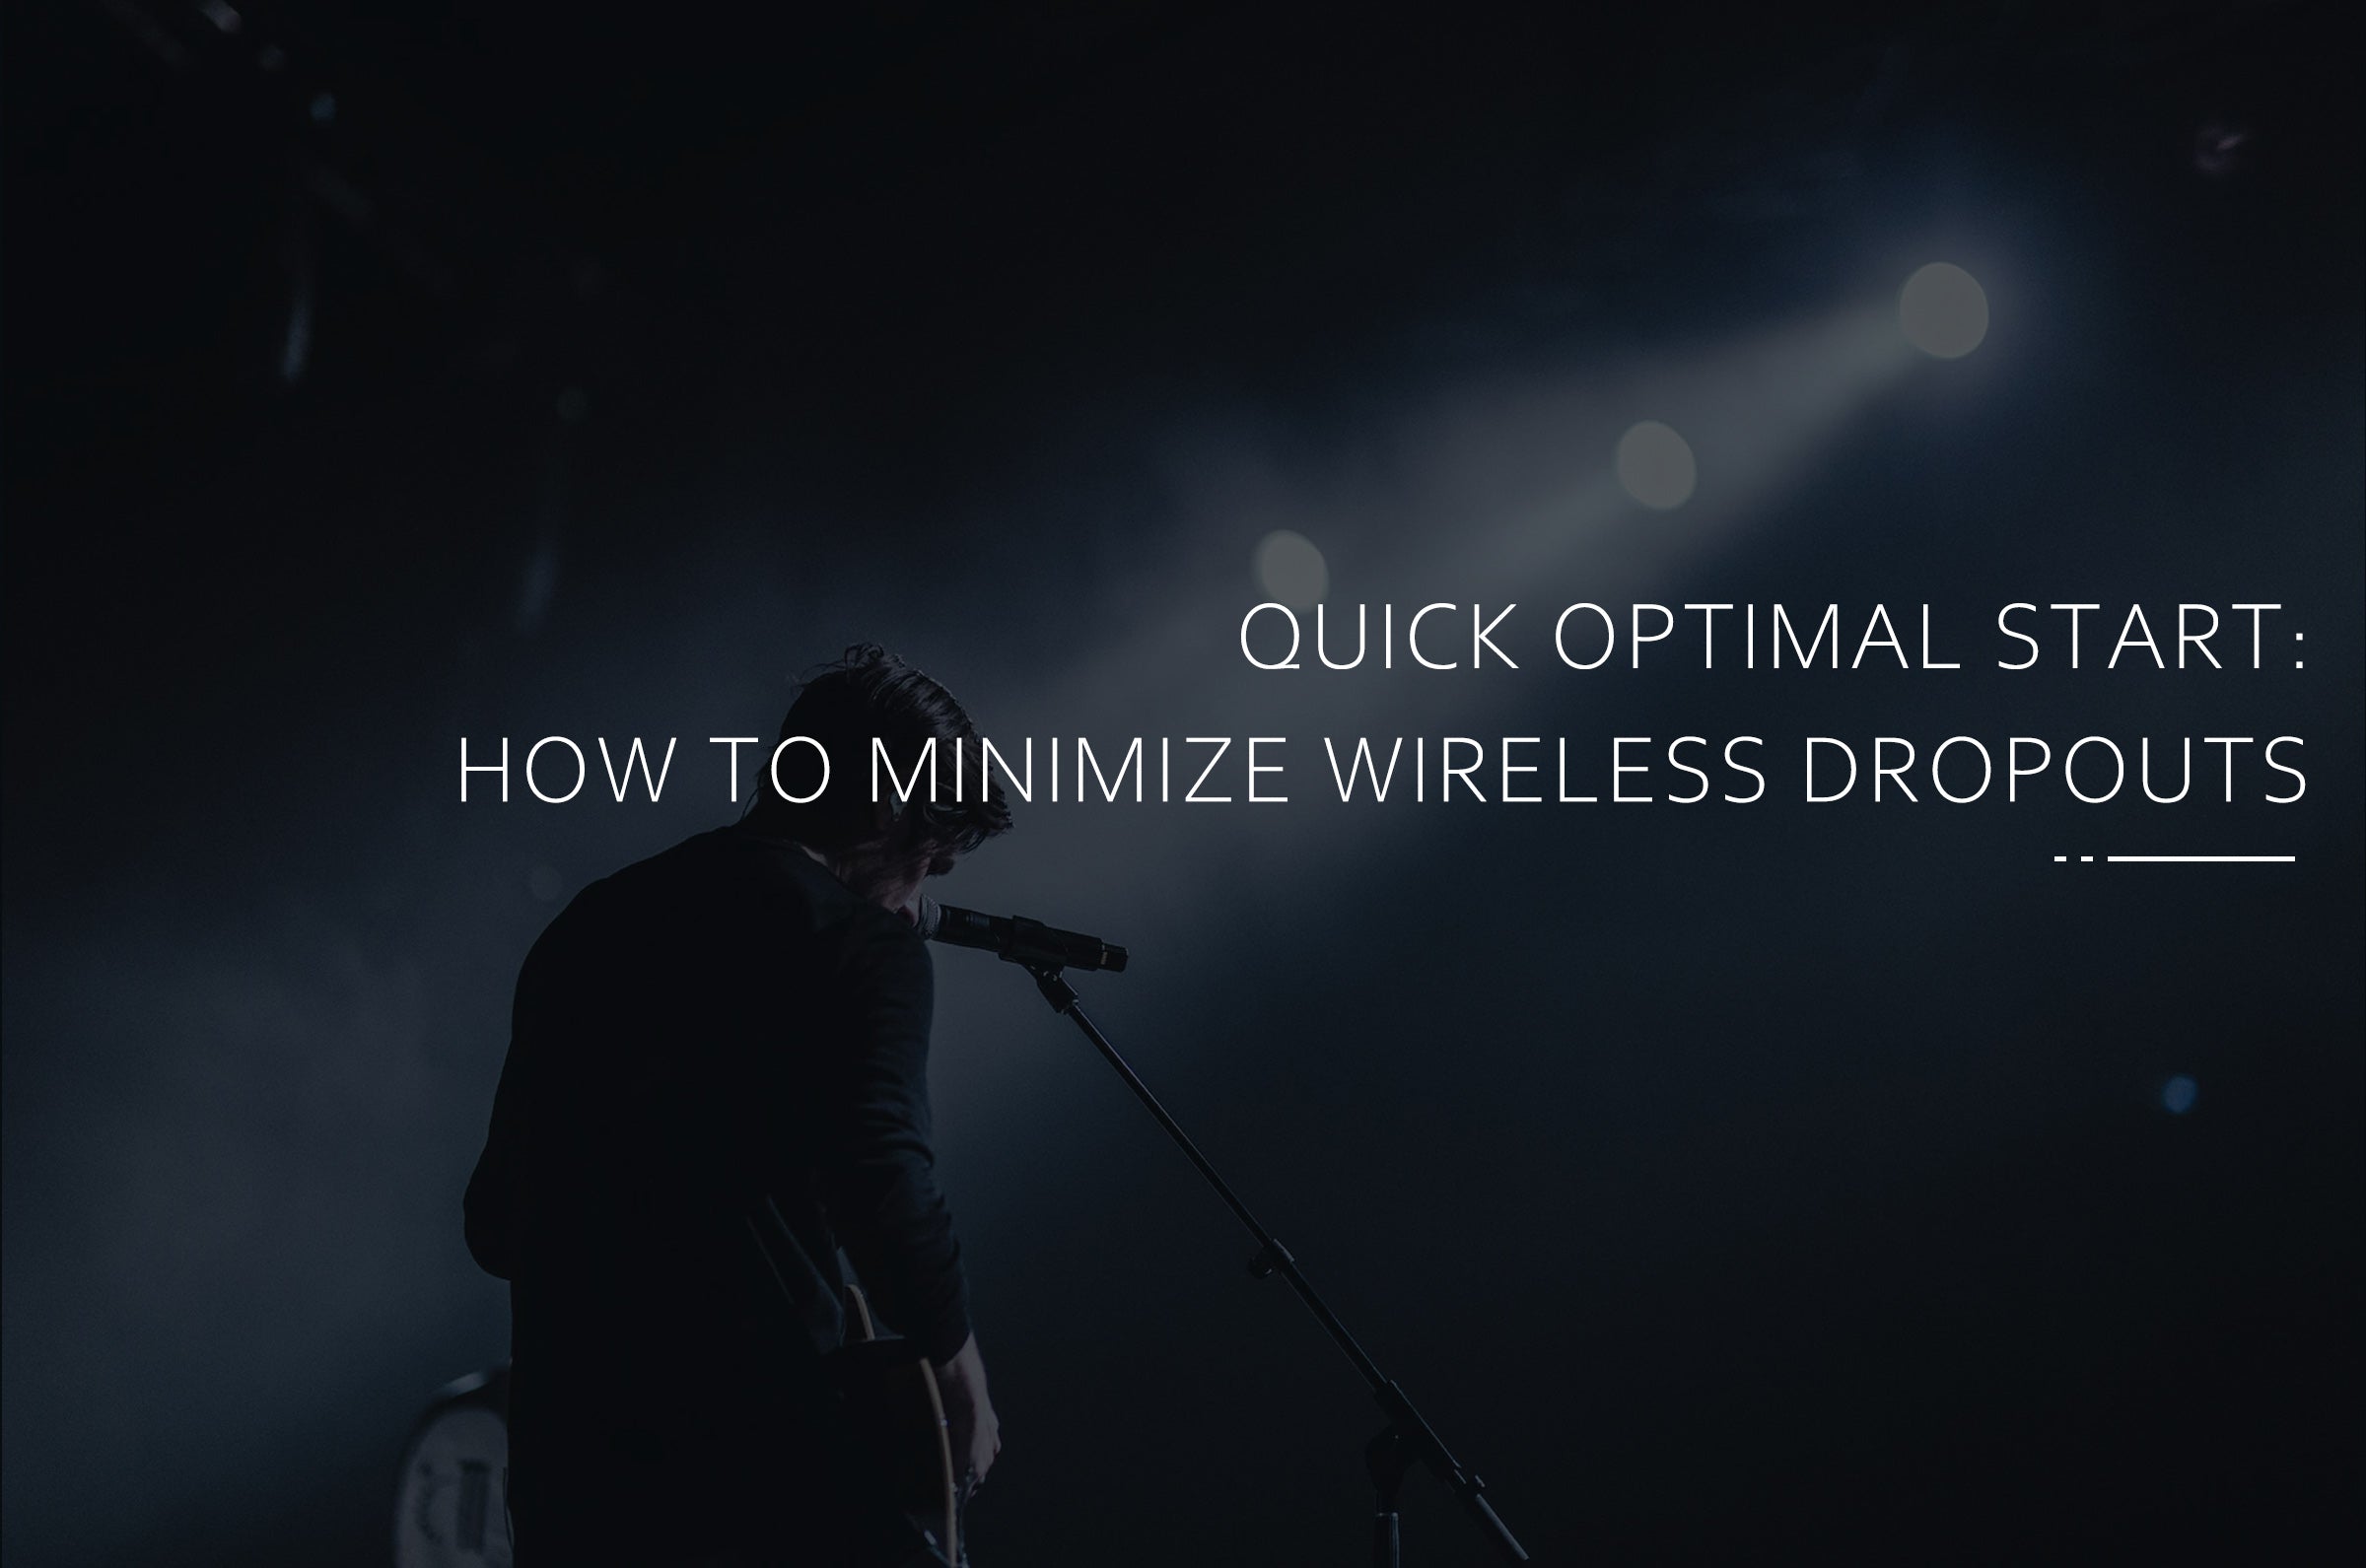 Quick Optimal Start: How to Minimize Wireless Dropouts